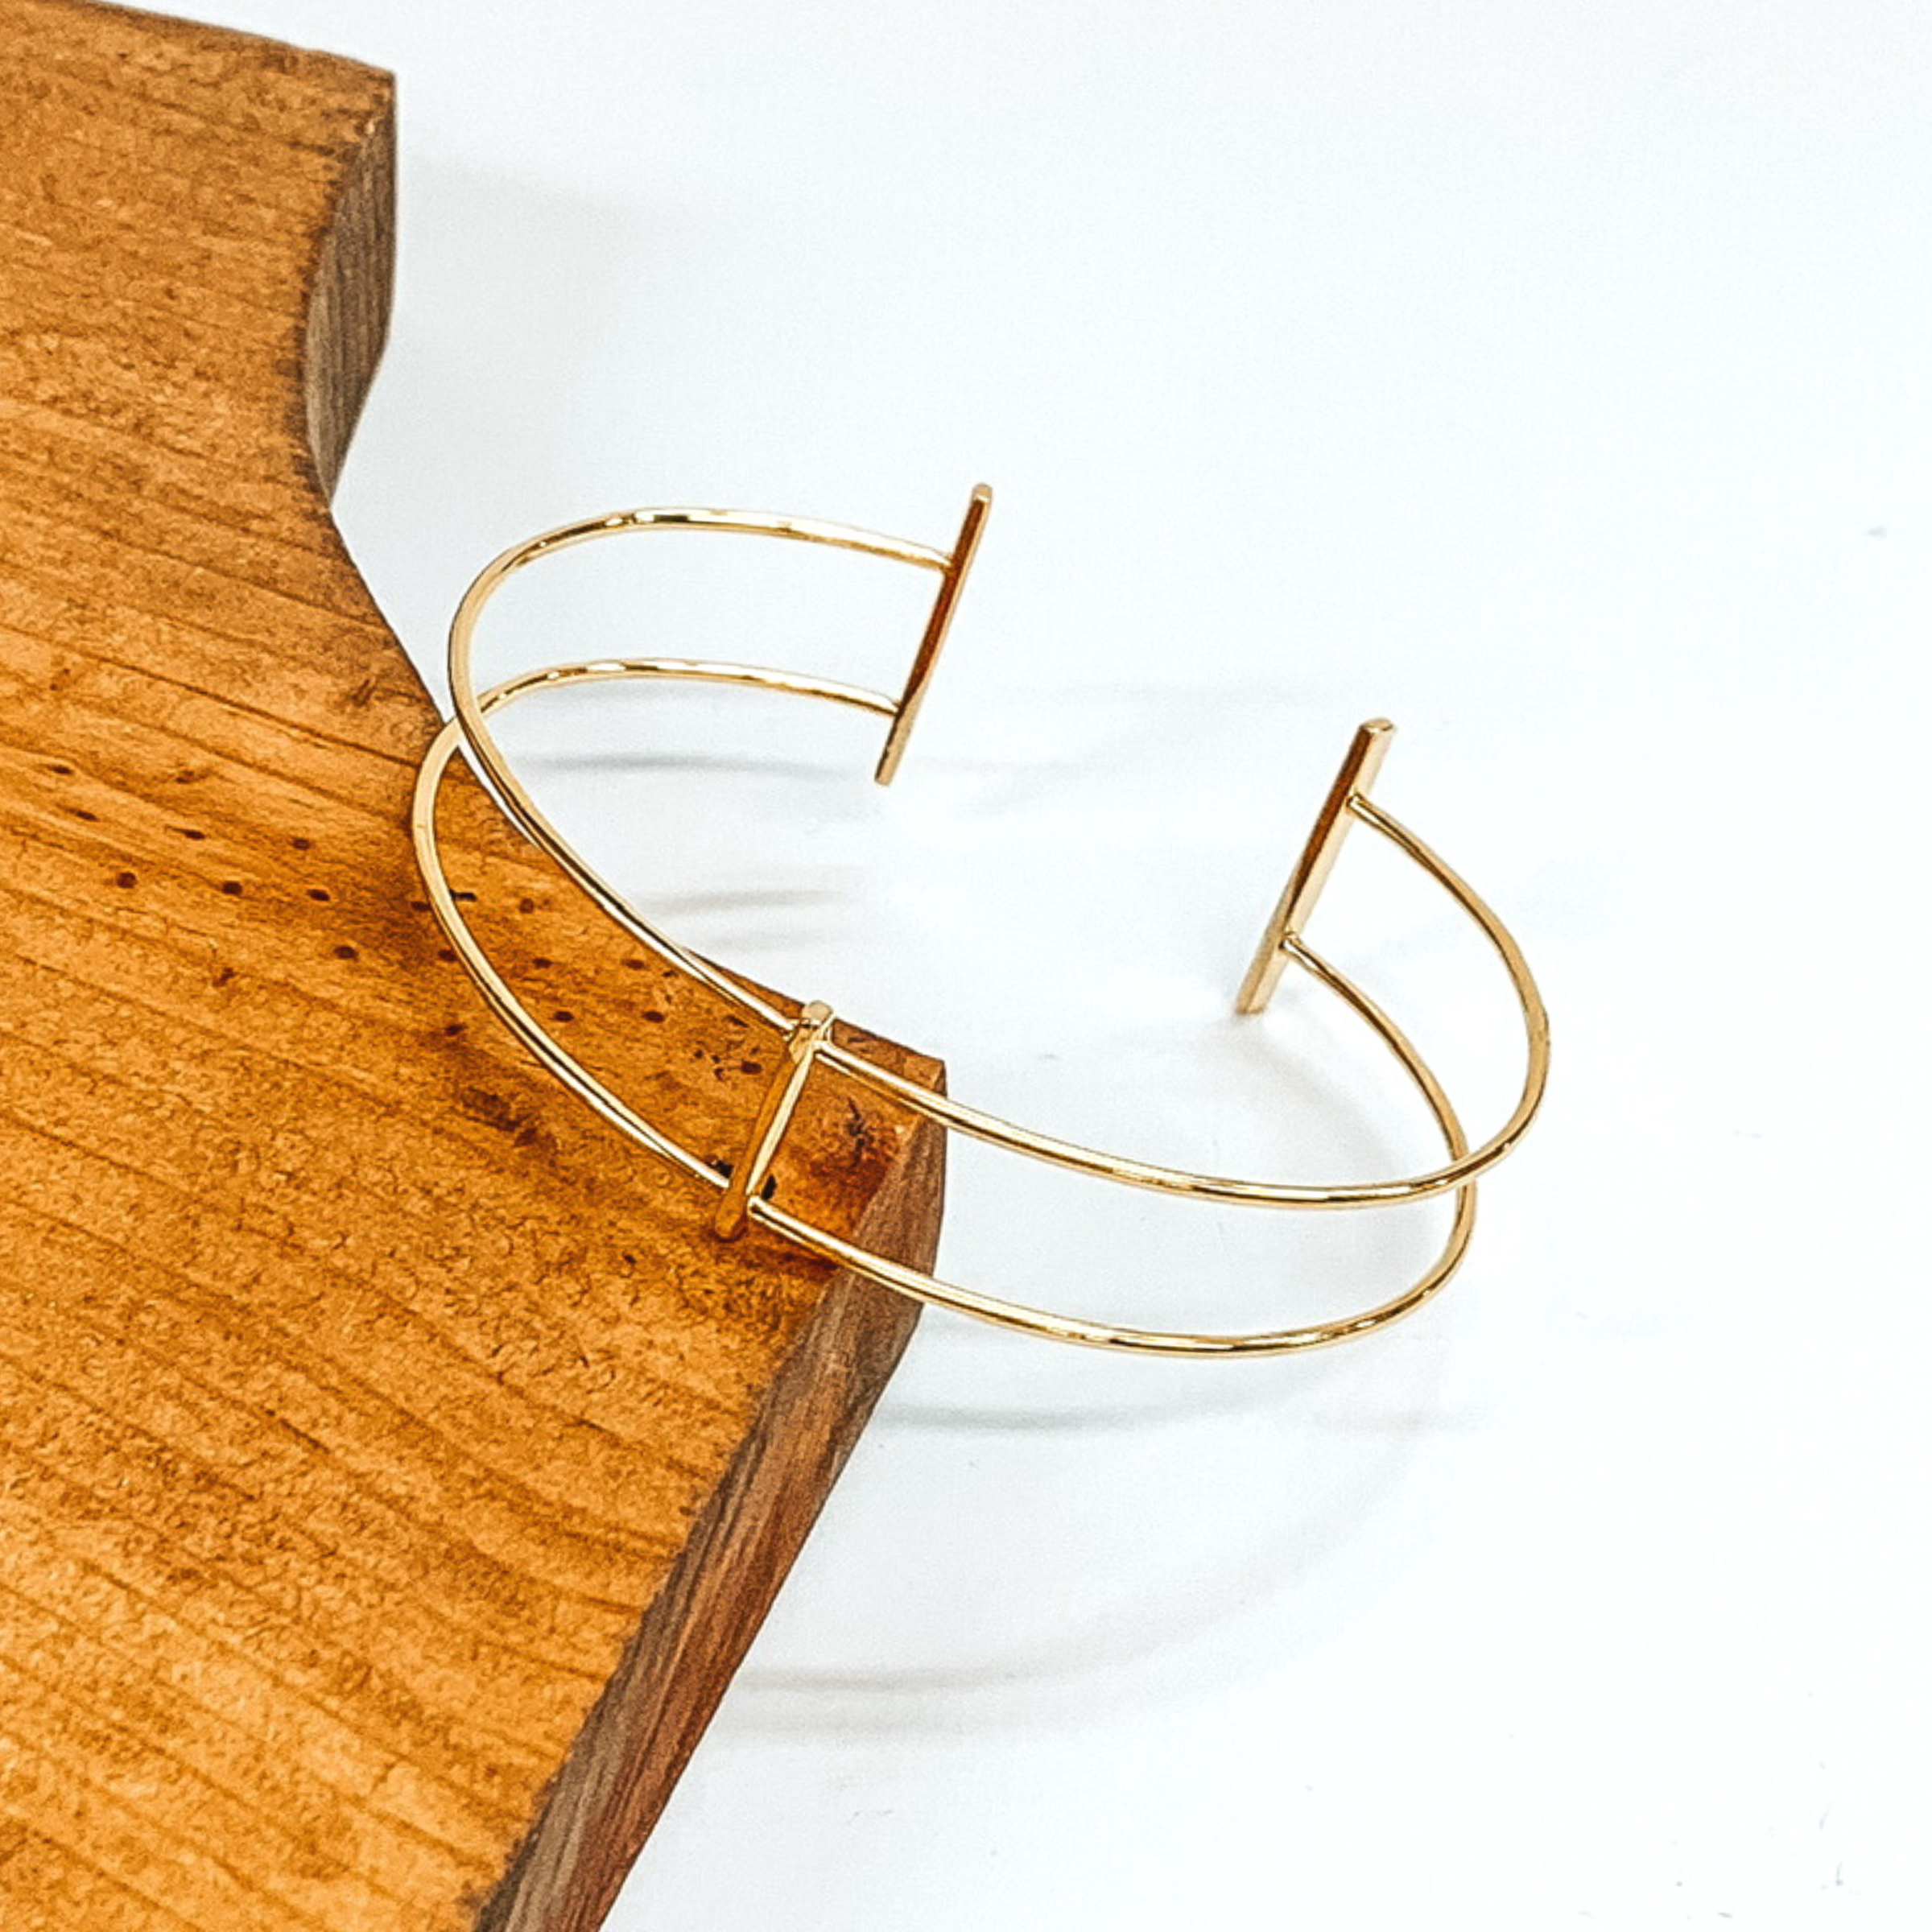 Thin, double wire bangle in gold. The center of the bangle is a plain, thin bar connecting the two wires. The ends have two gold bars. This bracelet is pictured laying on a brown block on a white background.